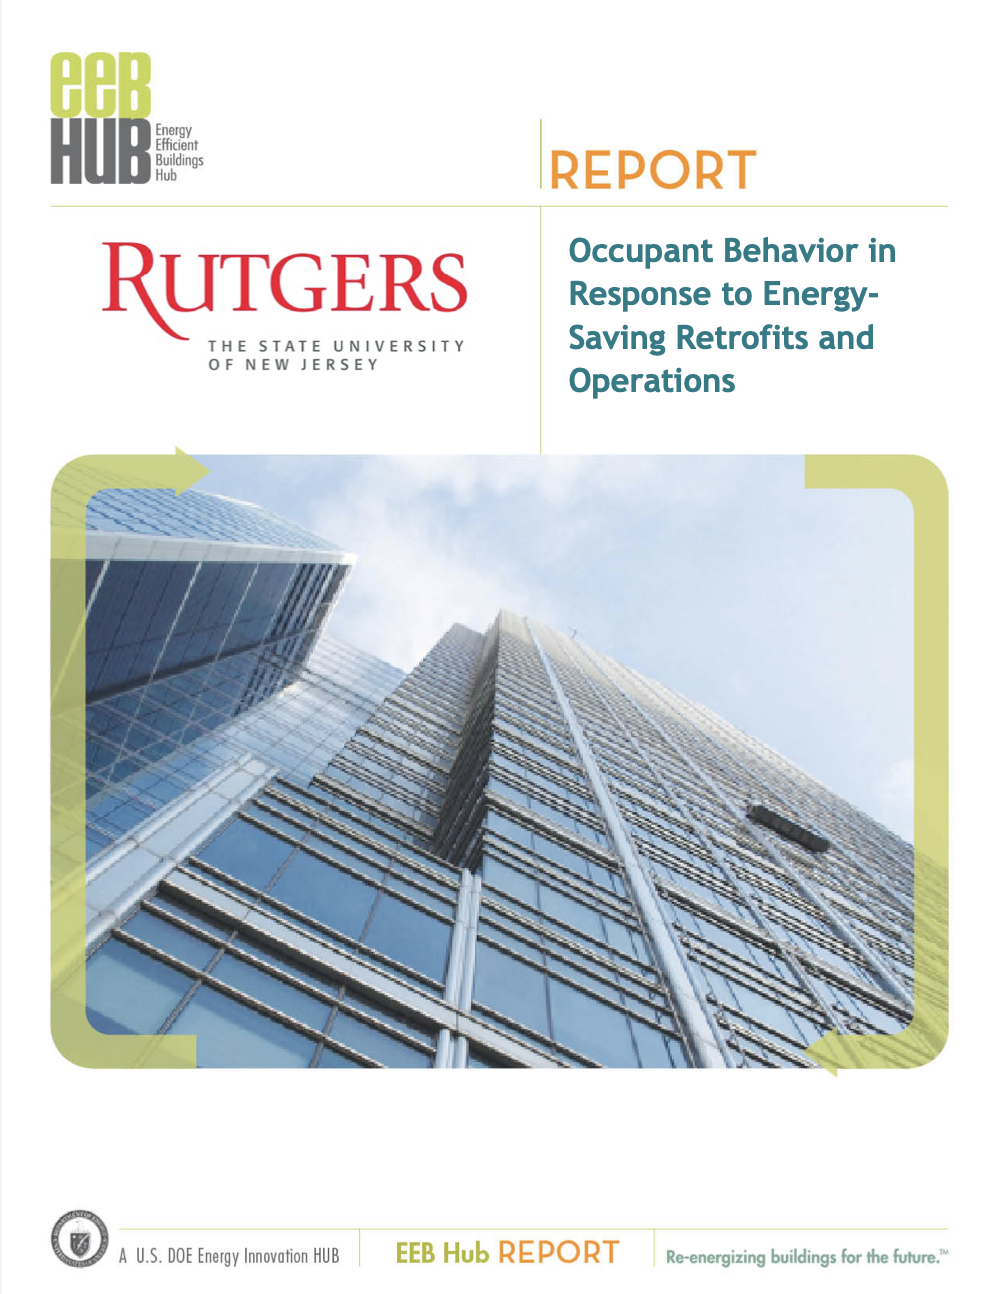 Occupant Behavior in Response to Energy-Saving Retrofits and Operations